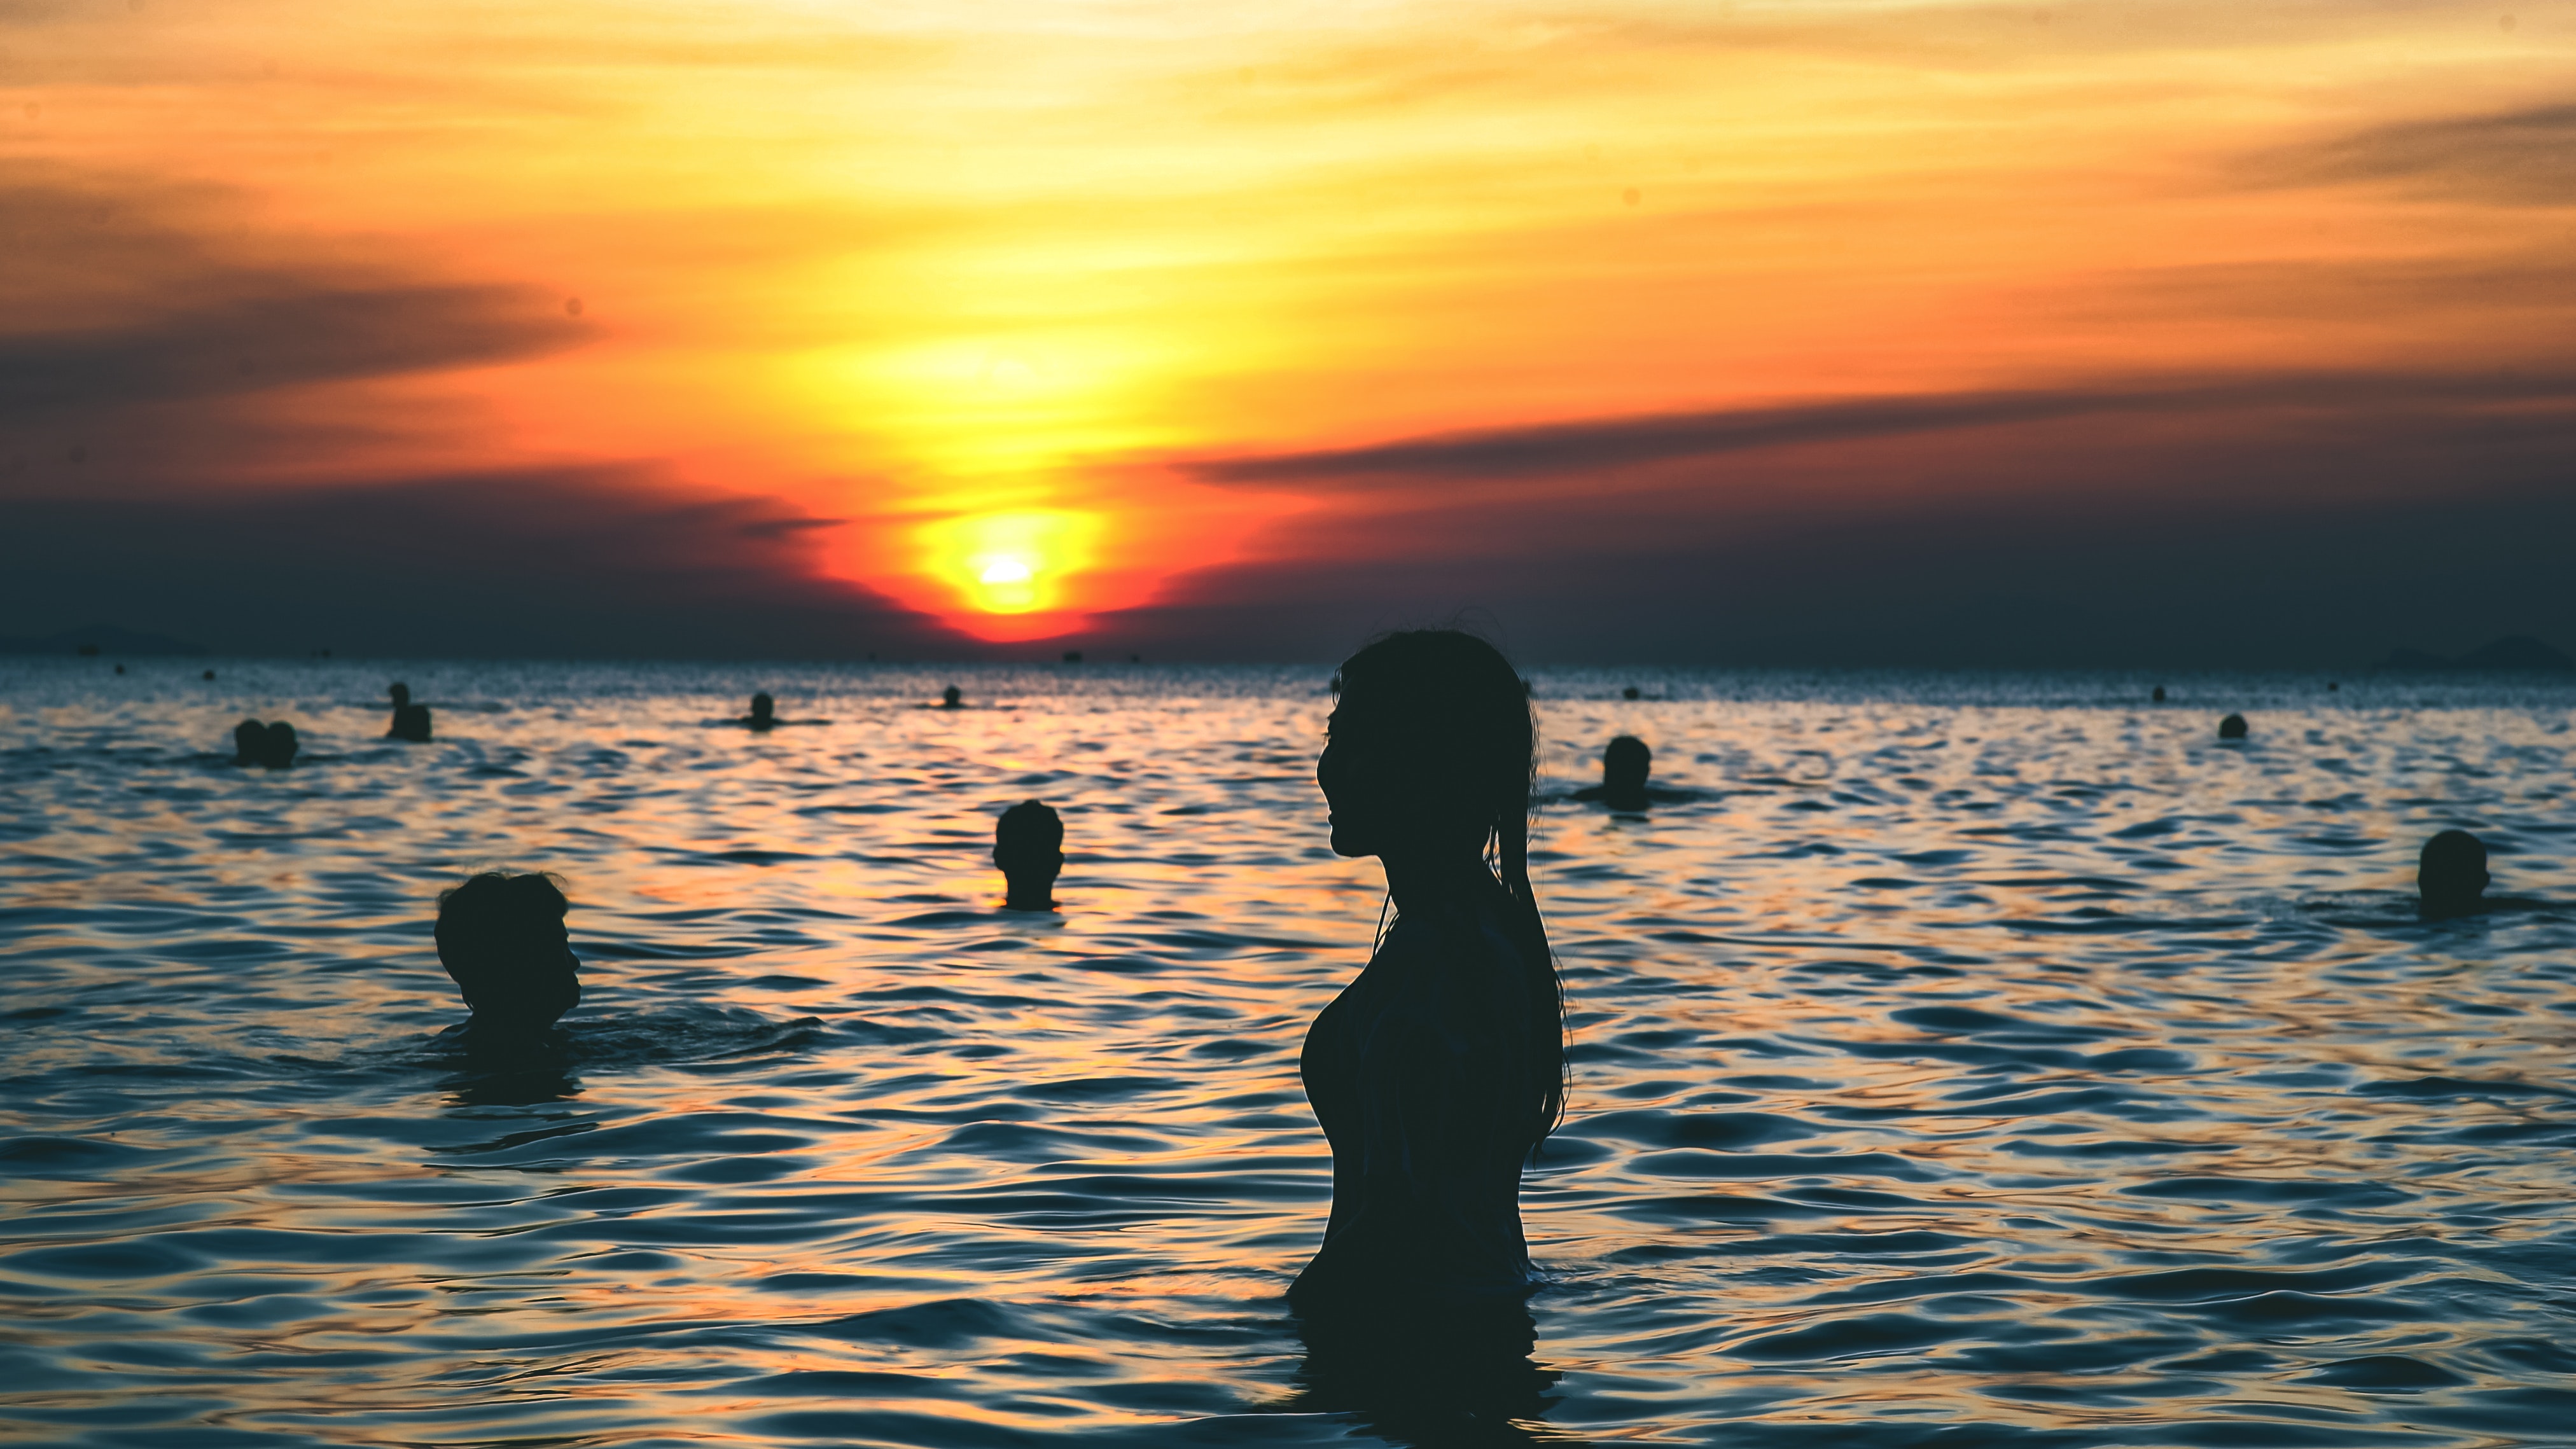 Silhouette Photography of People Swimming on the Beach during Golden Hour, Backlit, Scenic, Water, Vacation, HQ Photo